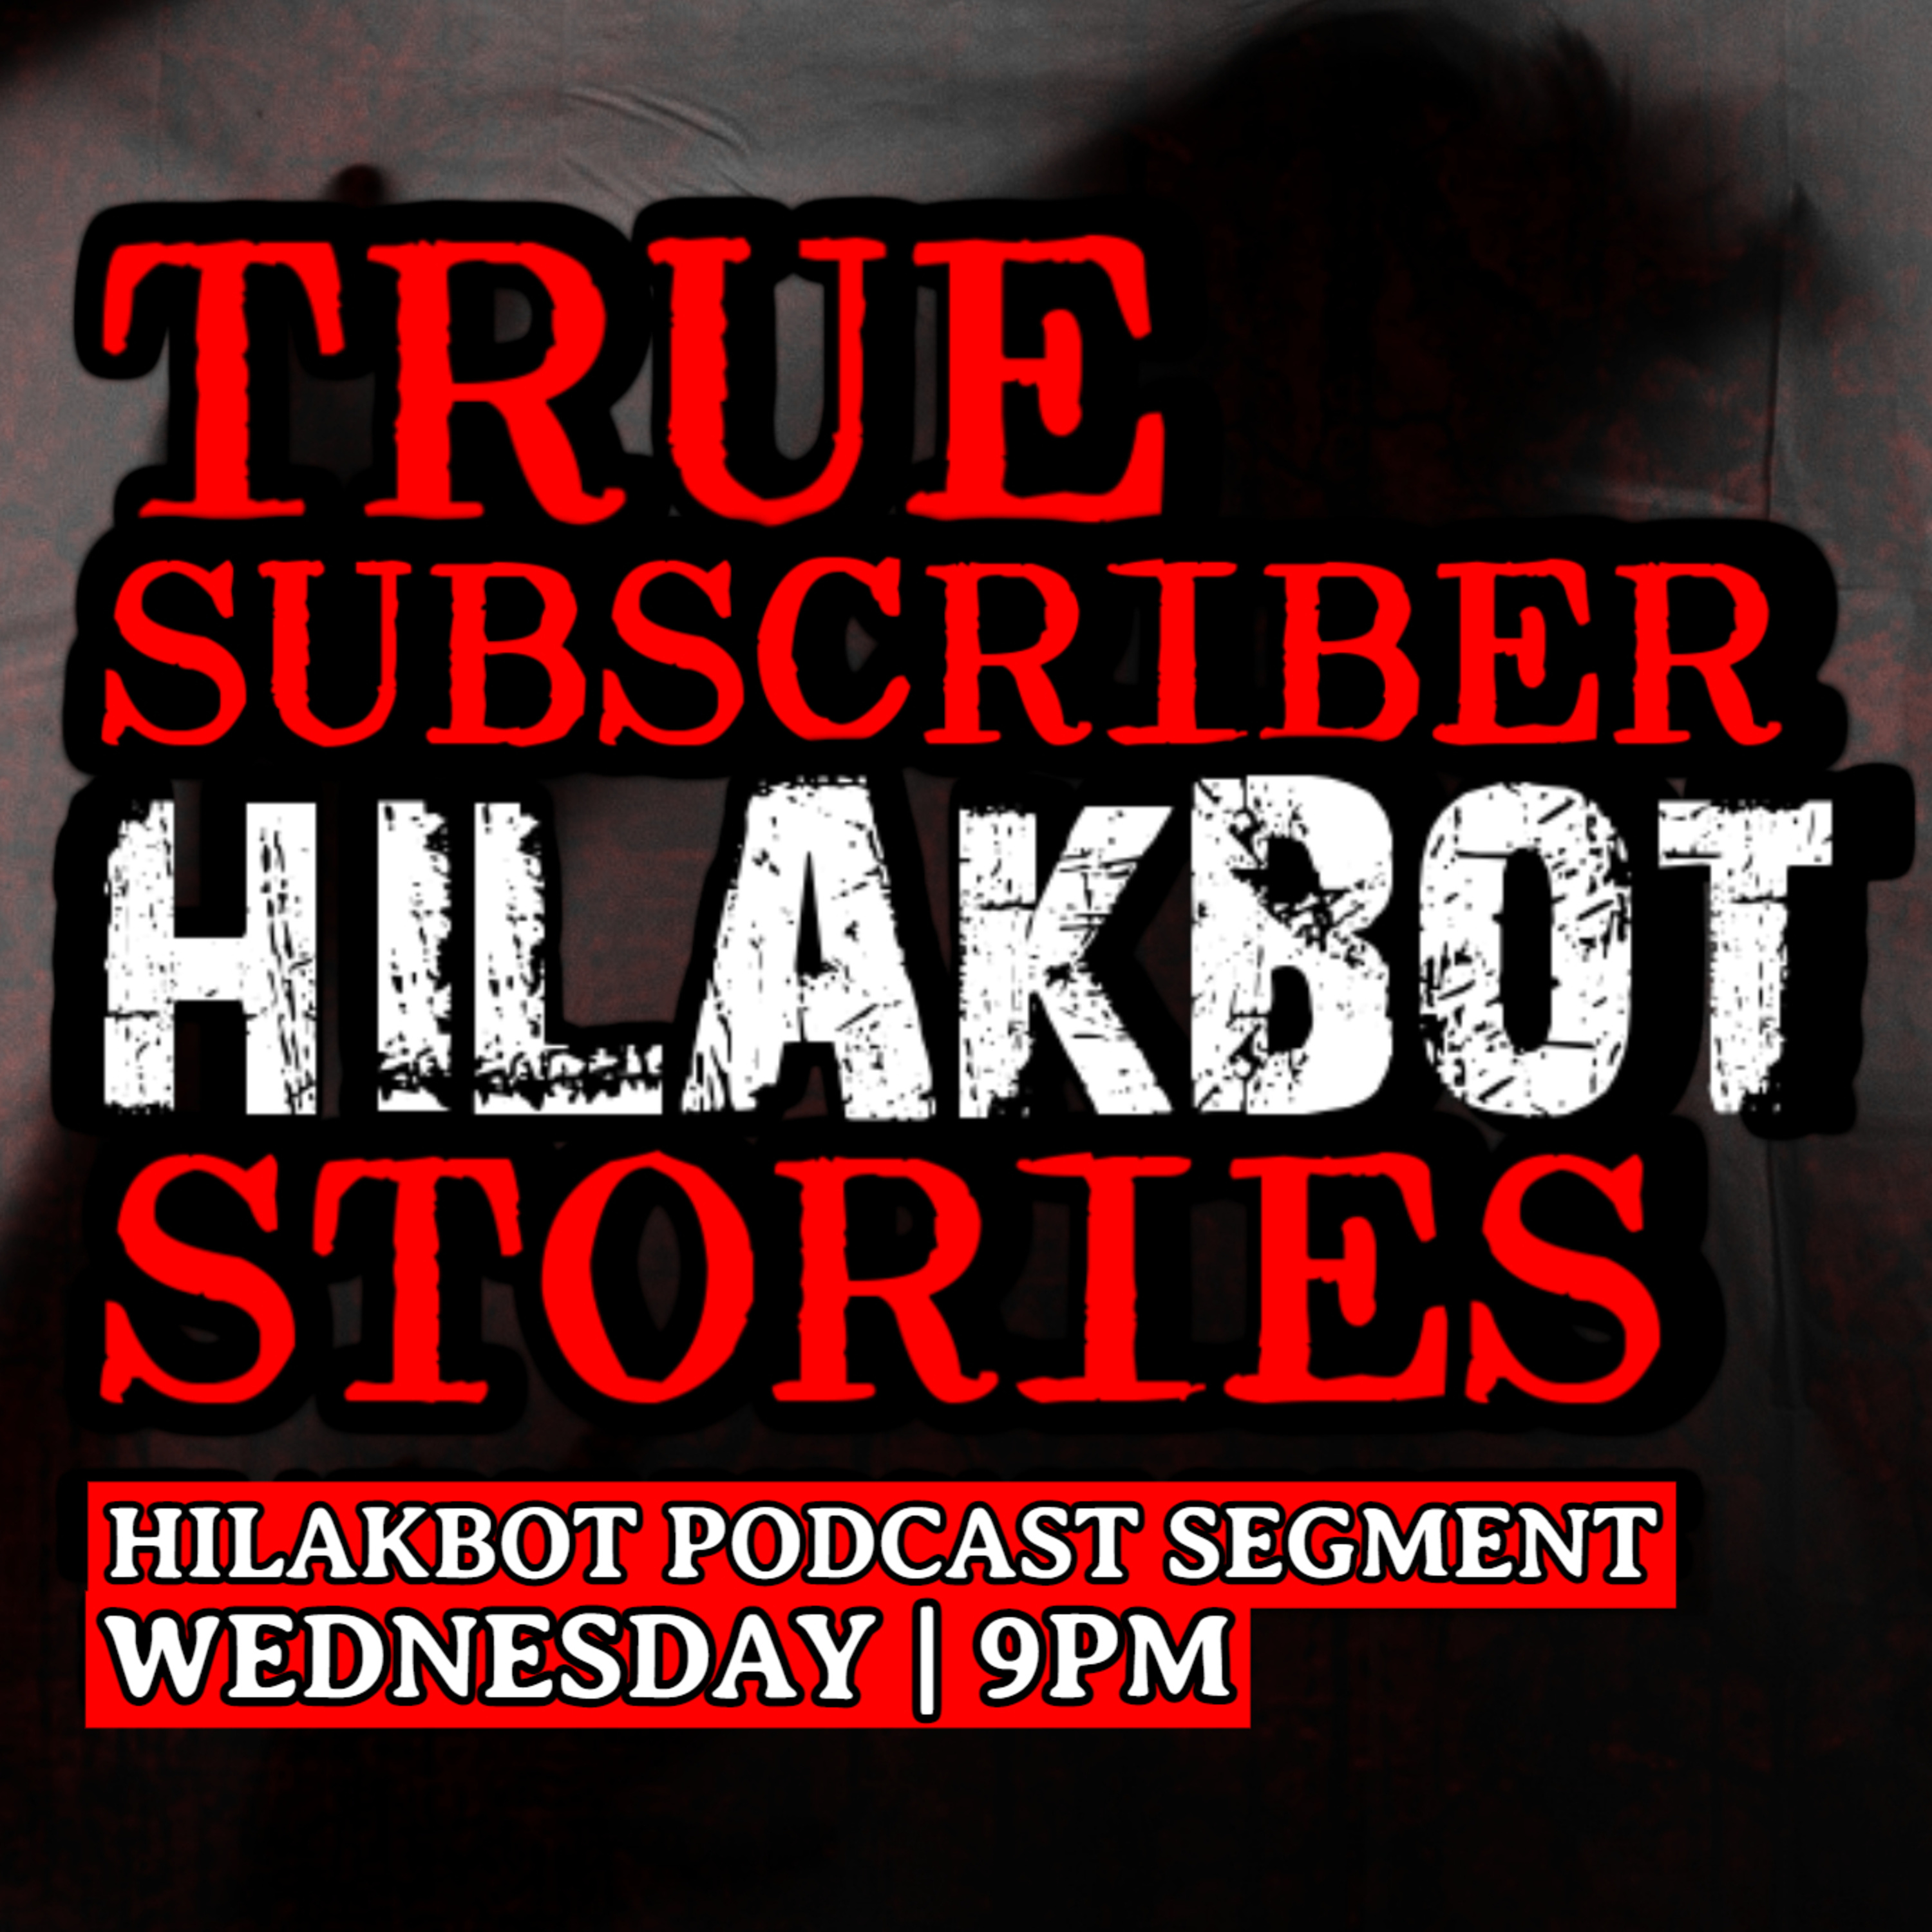 TRUE SUBSCRIBER'S HILAKBOT STORIES 12 | Listener's Submitted Scary Stories | HTV Segment